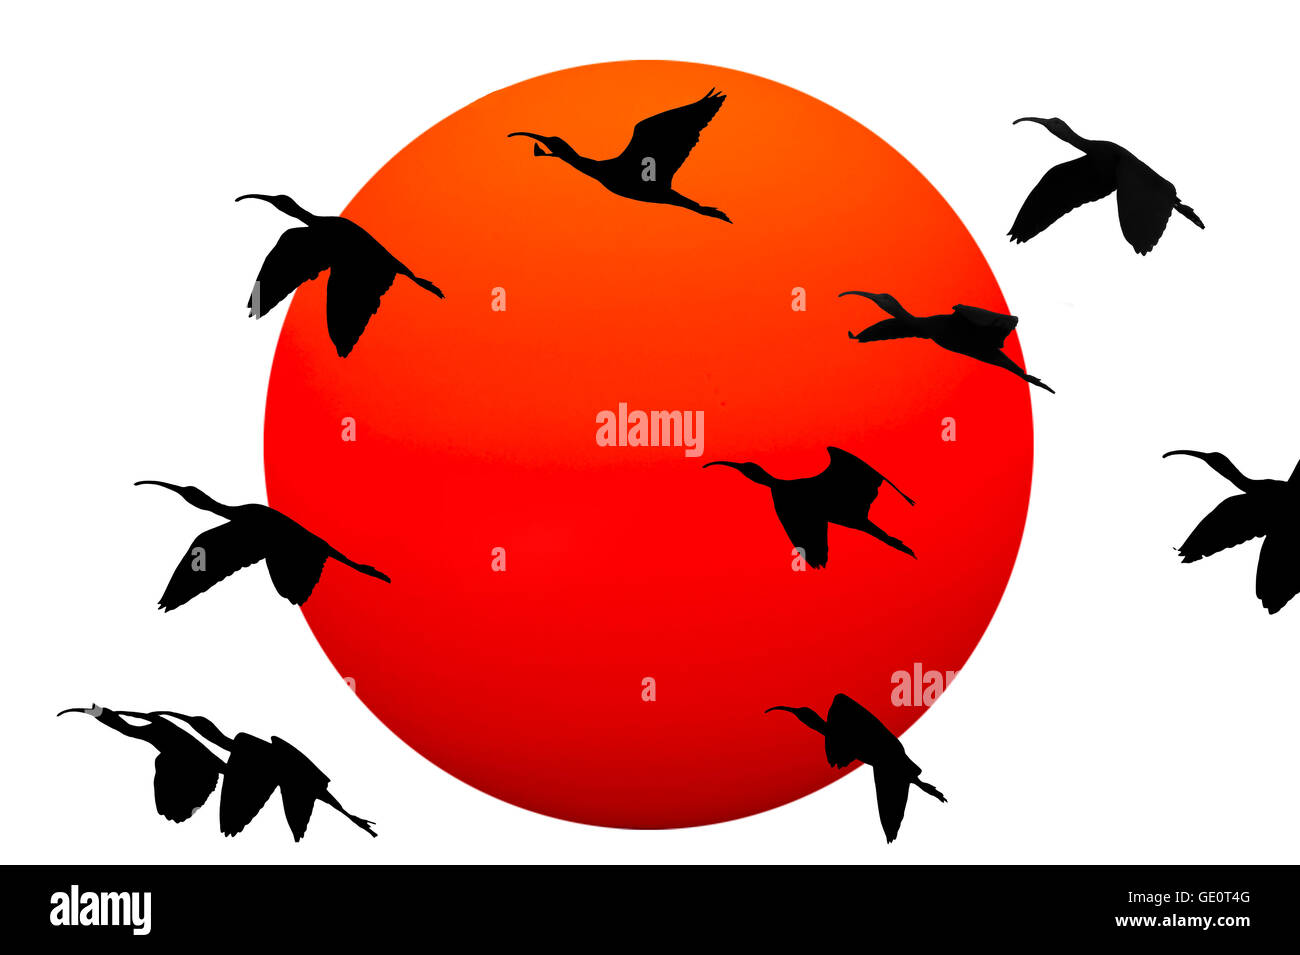 Silhouettes of large birds flying against a red hot sun on a white background. Stock Photo